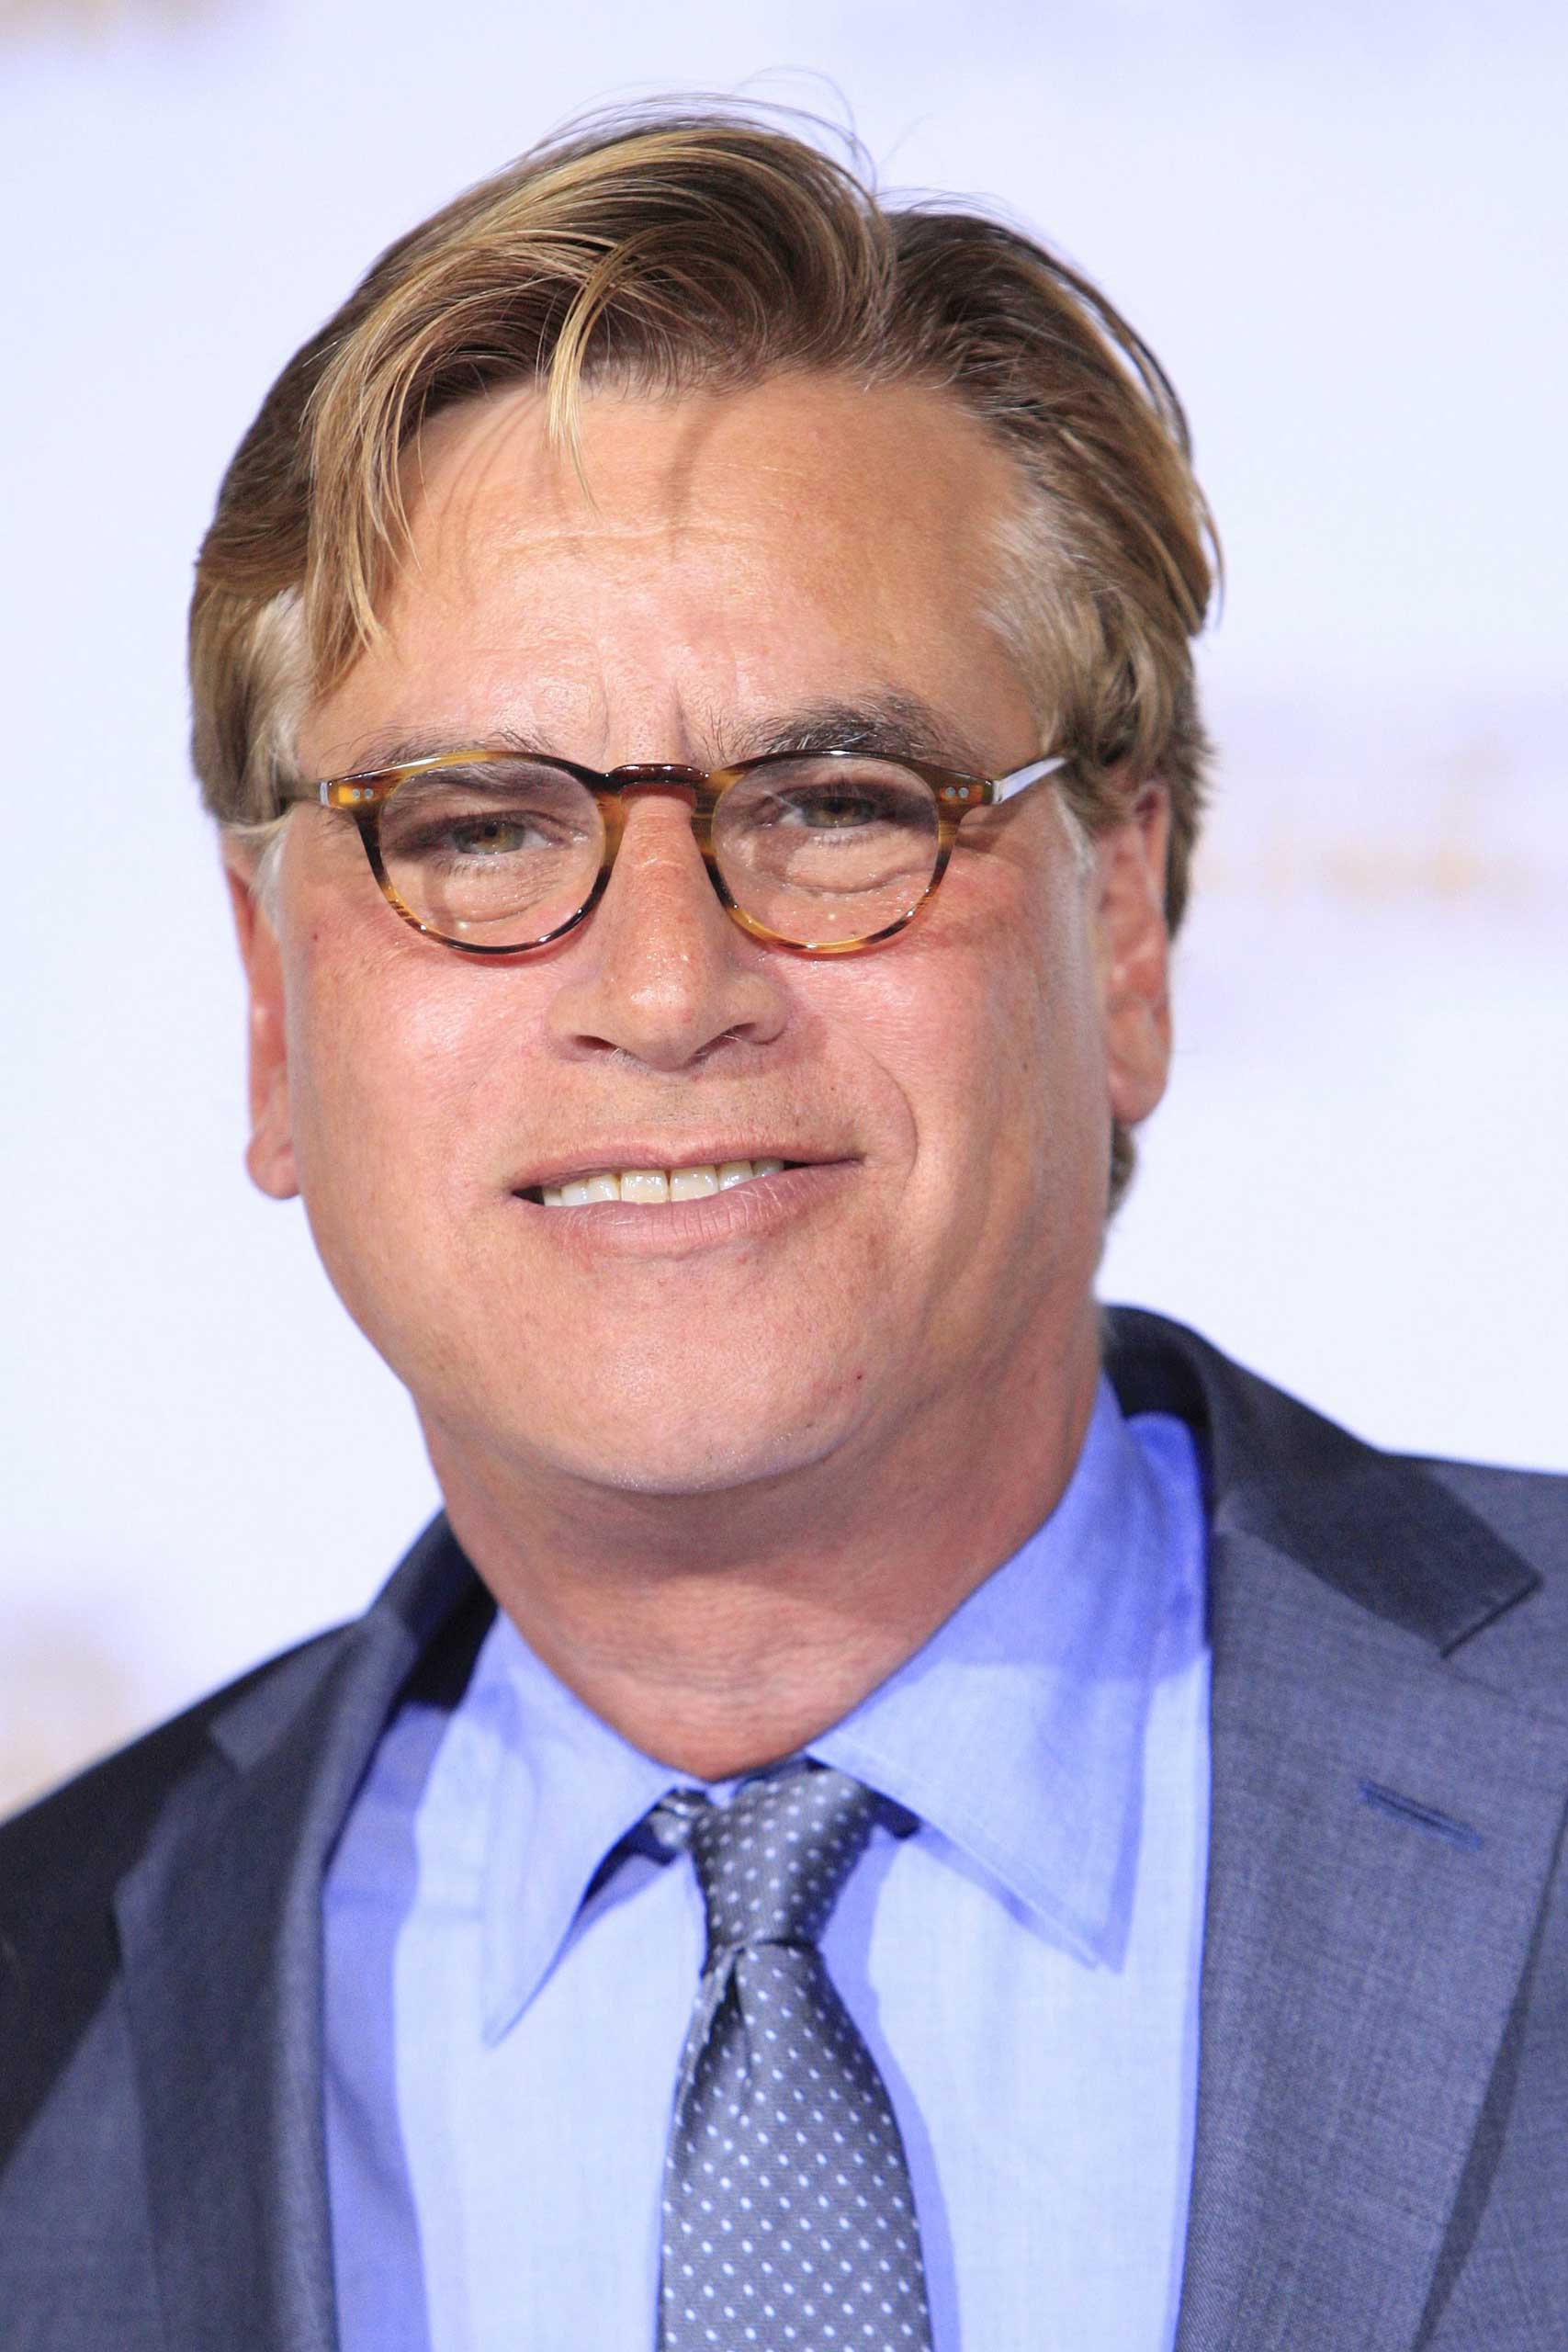 Screenwriter Aaron Sorkin arrives for the premiere of 'The Hunger Games: Mockingjay - Part 1' at the Nokia Theatre L.A. Live in Los Angeles on Nov. 17, 2014. (Nina Prommer—EPA)